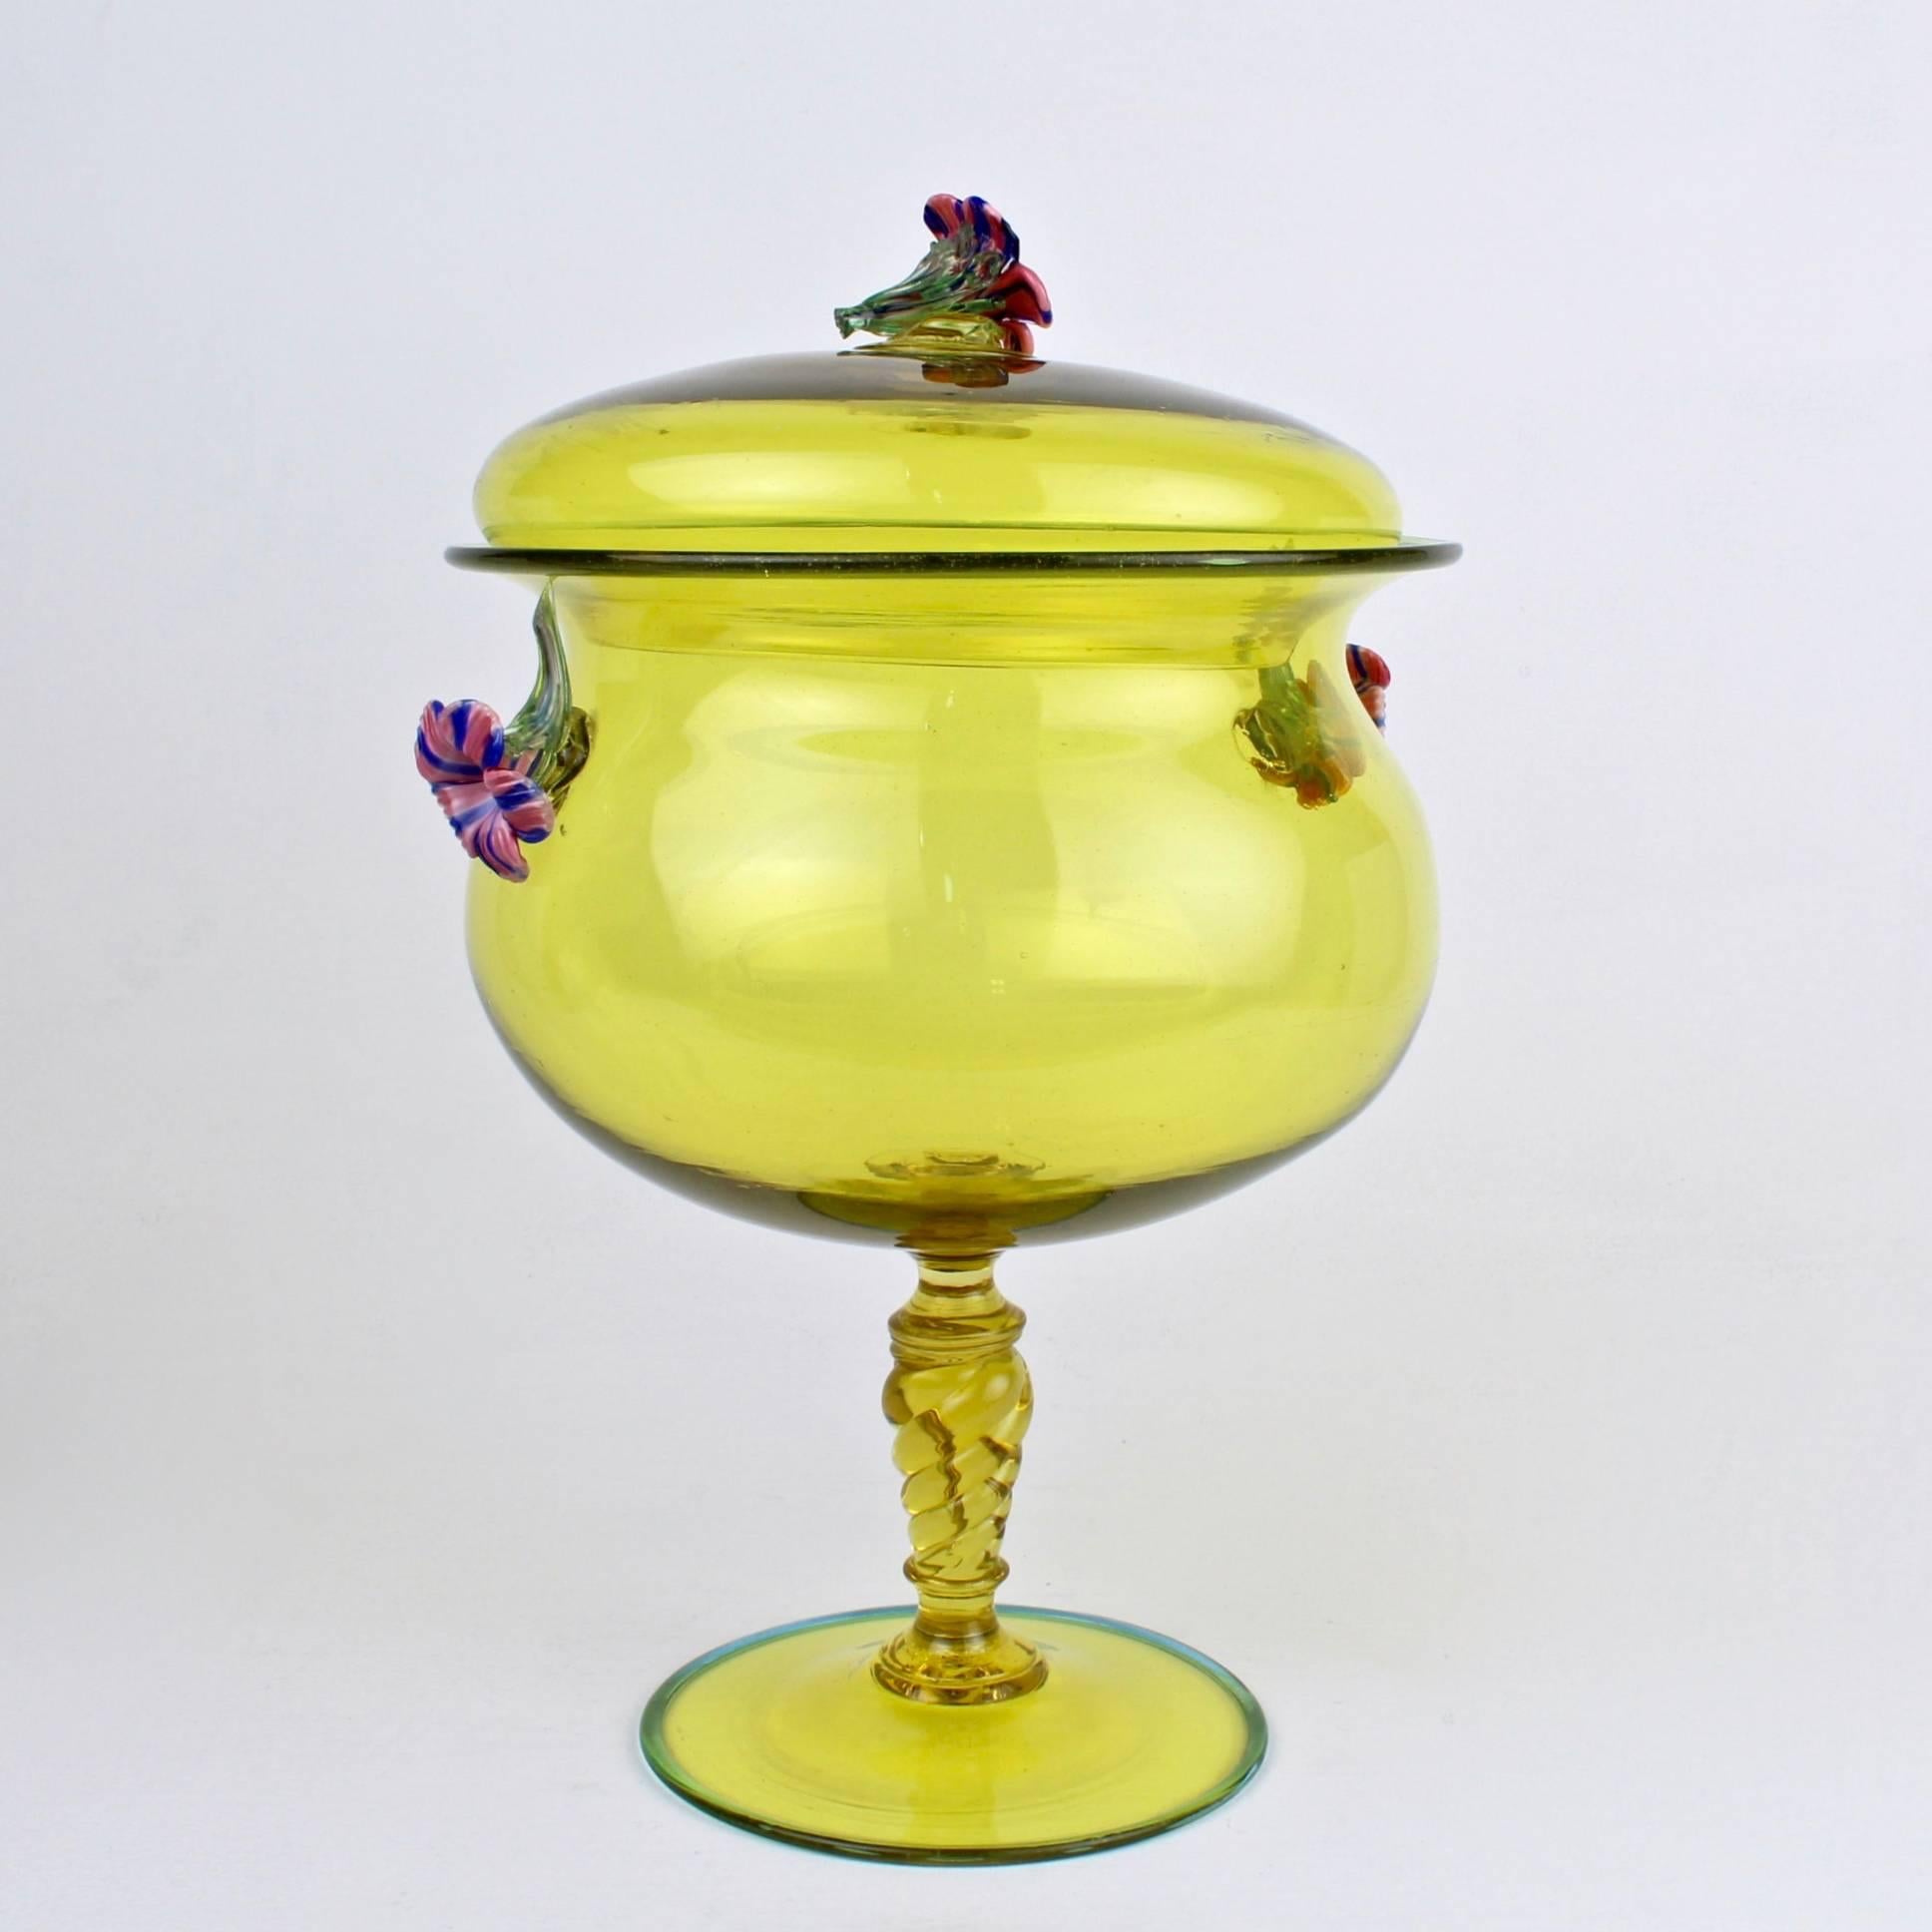 A fine, large, complex Venetian glass covered compote in canary yellow. 

The compote has a figural pink and blue applied finial and handles in the form of a trumpet shaped flowers. The lid rests on an urn from bowl that is supported by a twisted